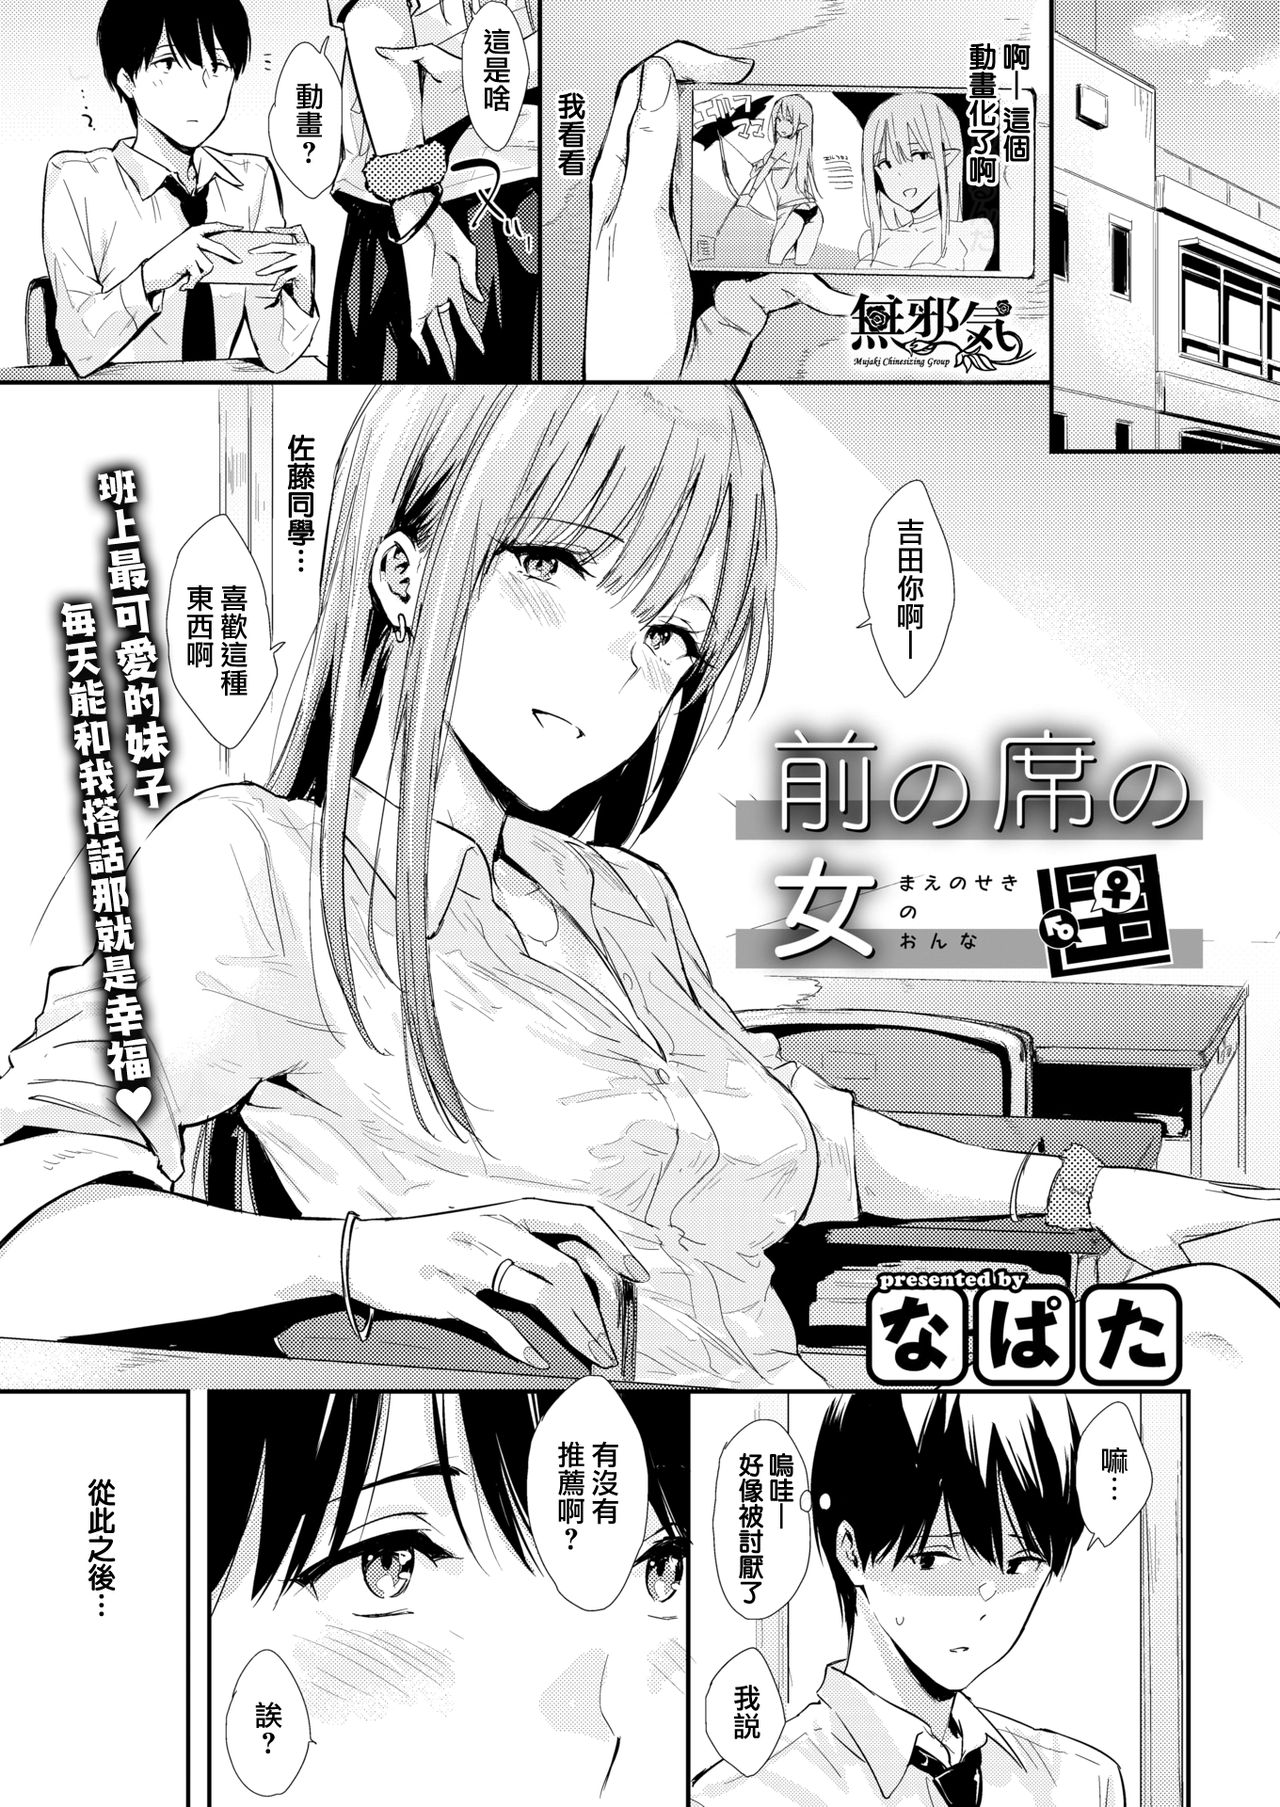 [Napata] The Girl in the Seat in Front of Me (COMIC Kairakuten 2020-03) [Chinese] [無邪気漢化組] [Digital] [なぱた] 前の席の女 (COMIC快楽天 2020年3月号) [中国翻訳] [DL版]